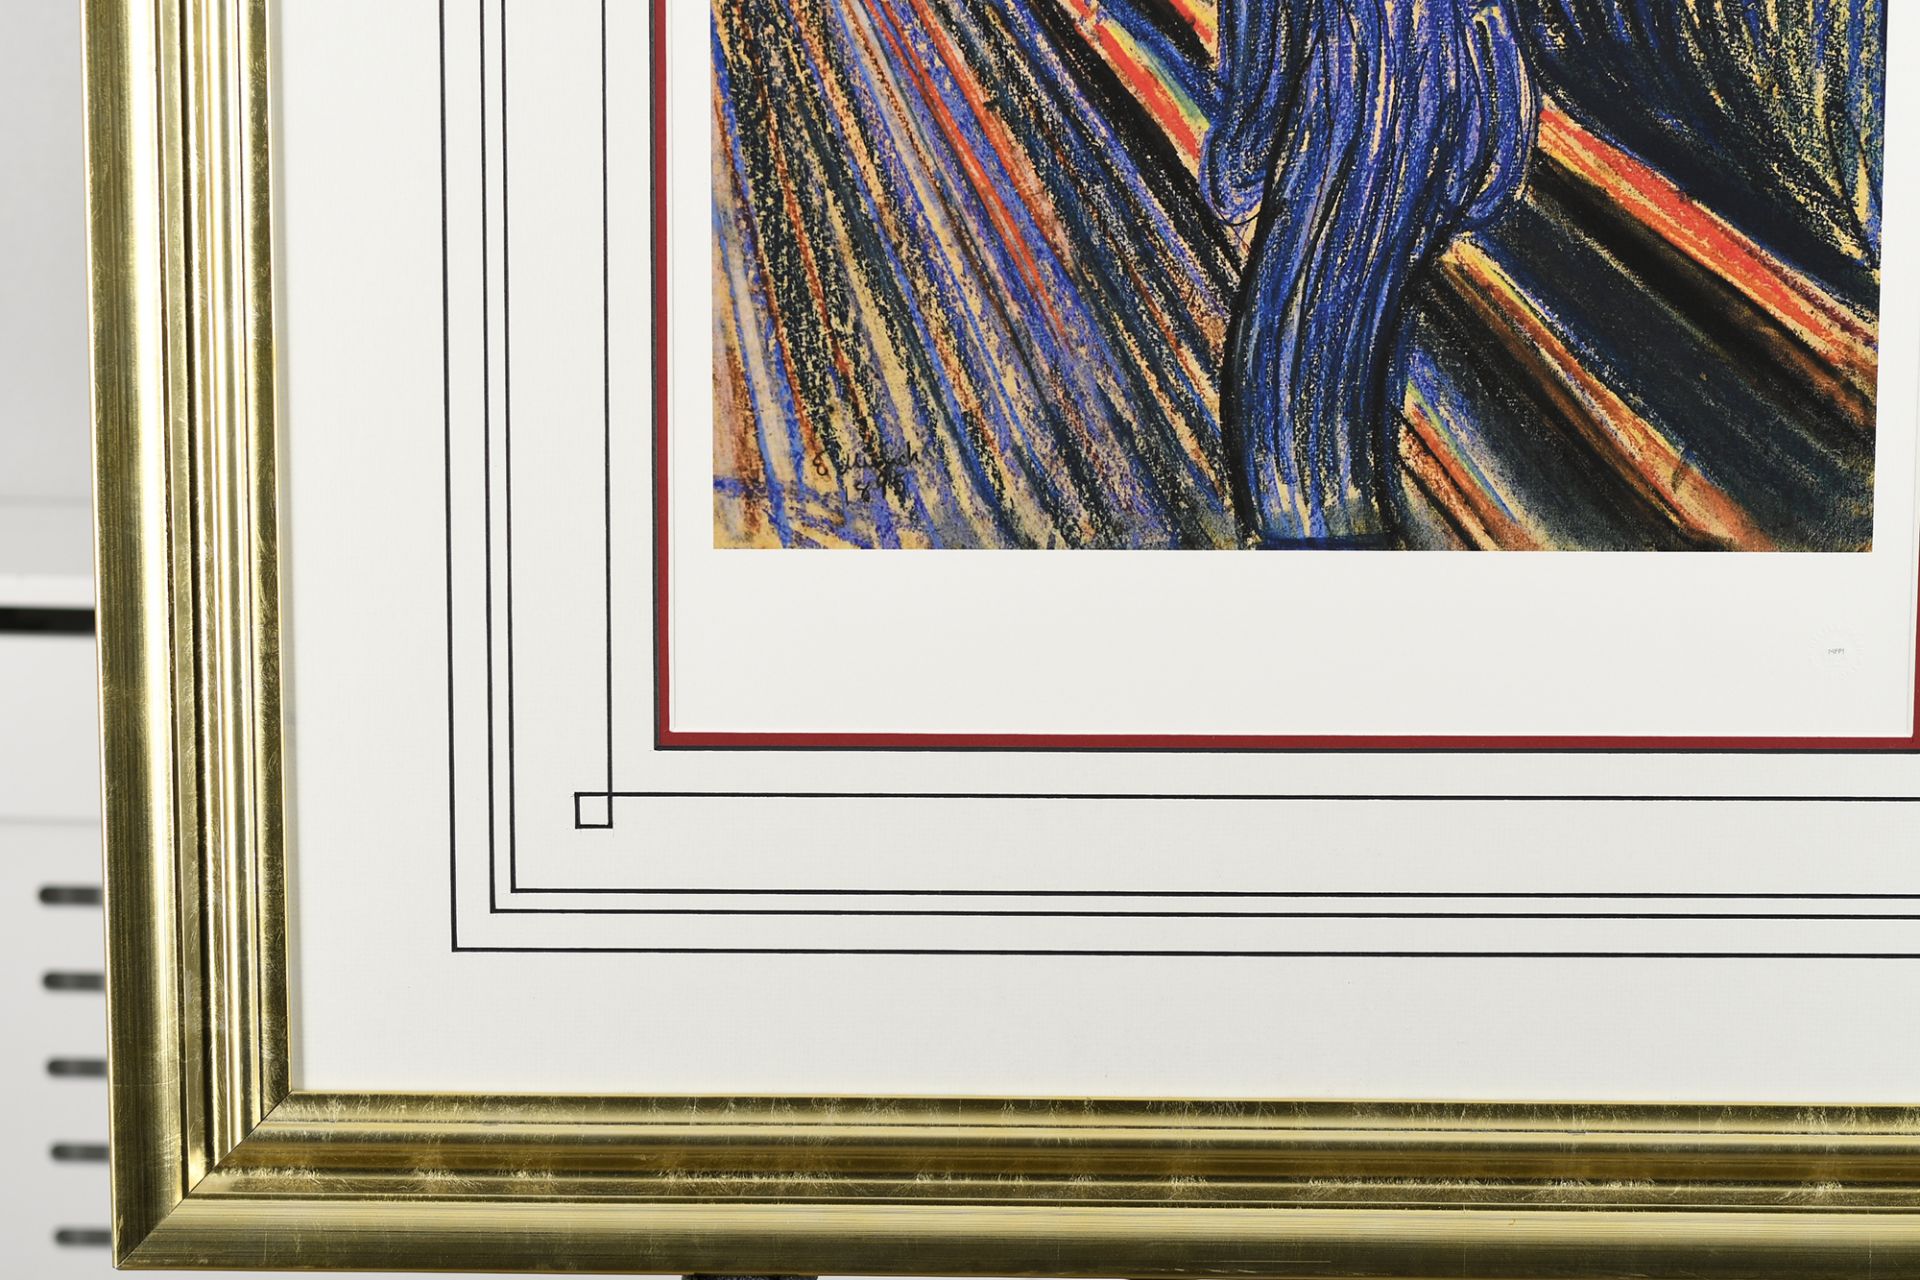 Edvard Munch Limited Edition "The Scream" - Image 7 of 10